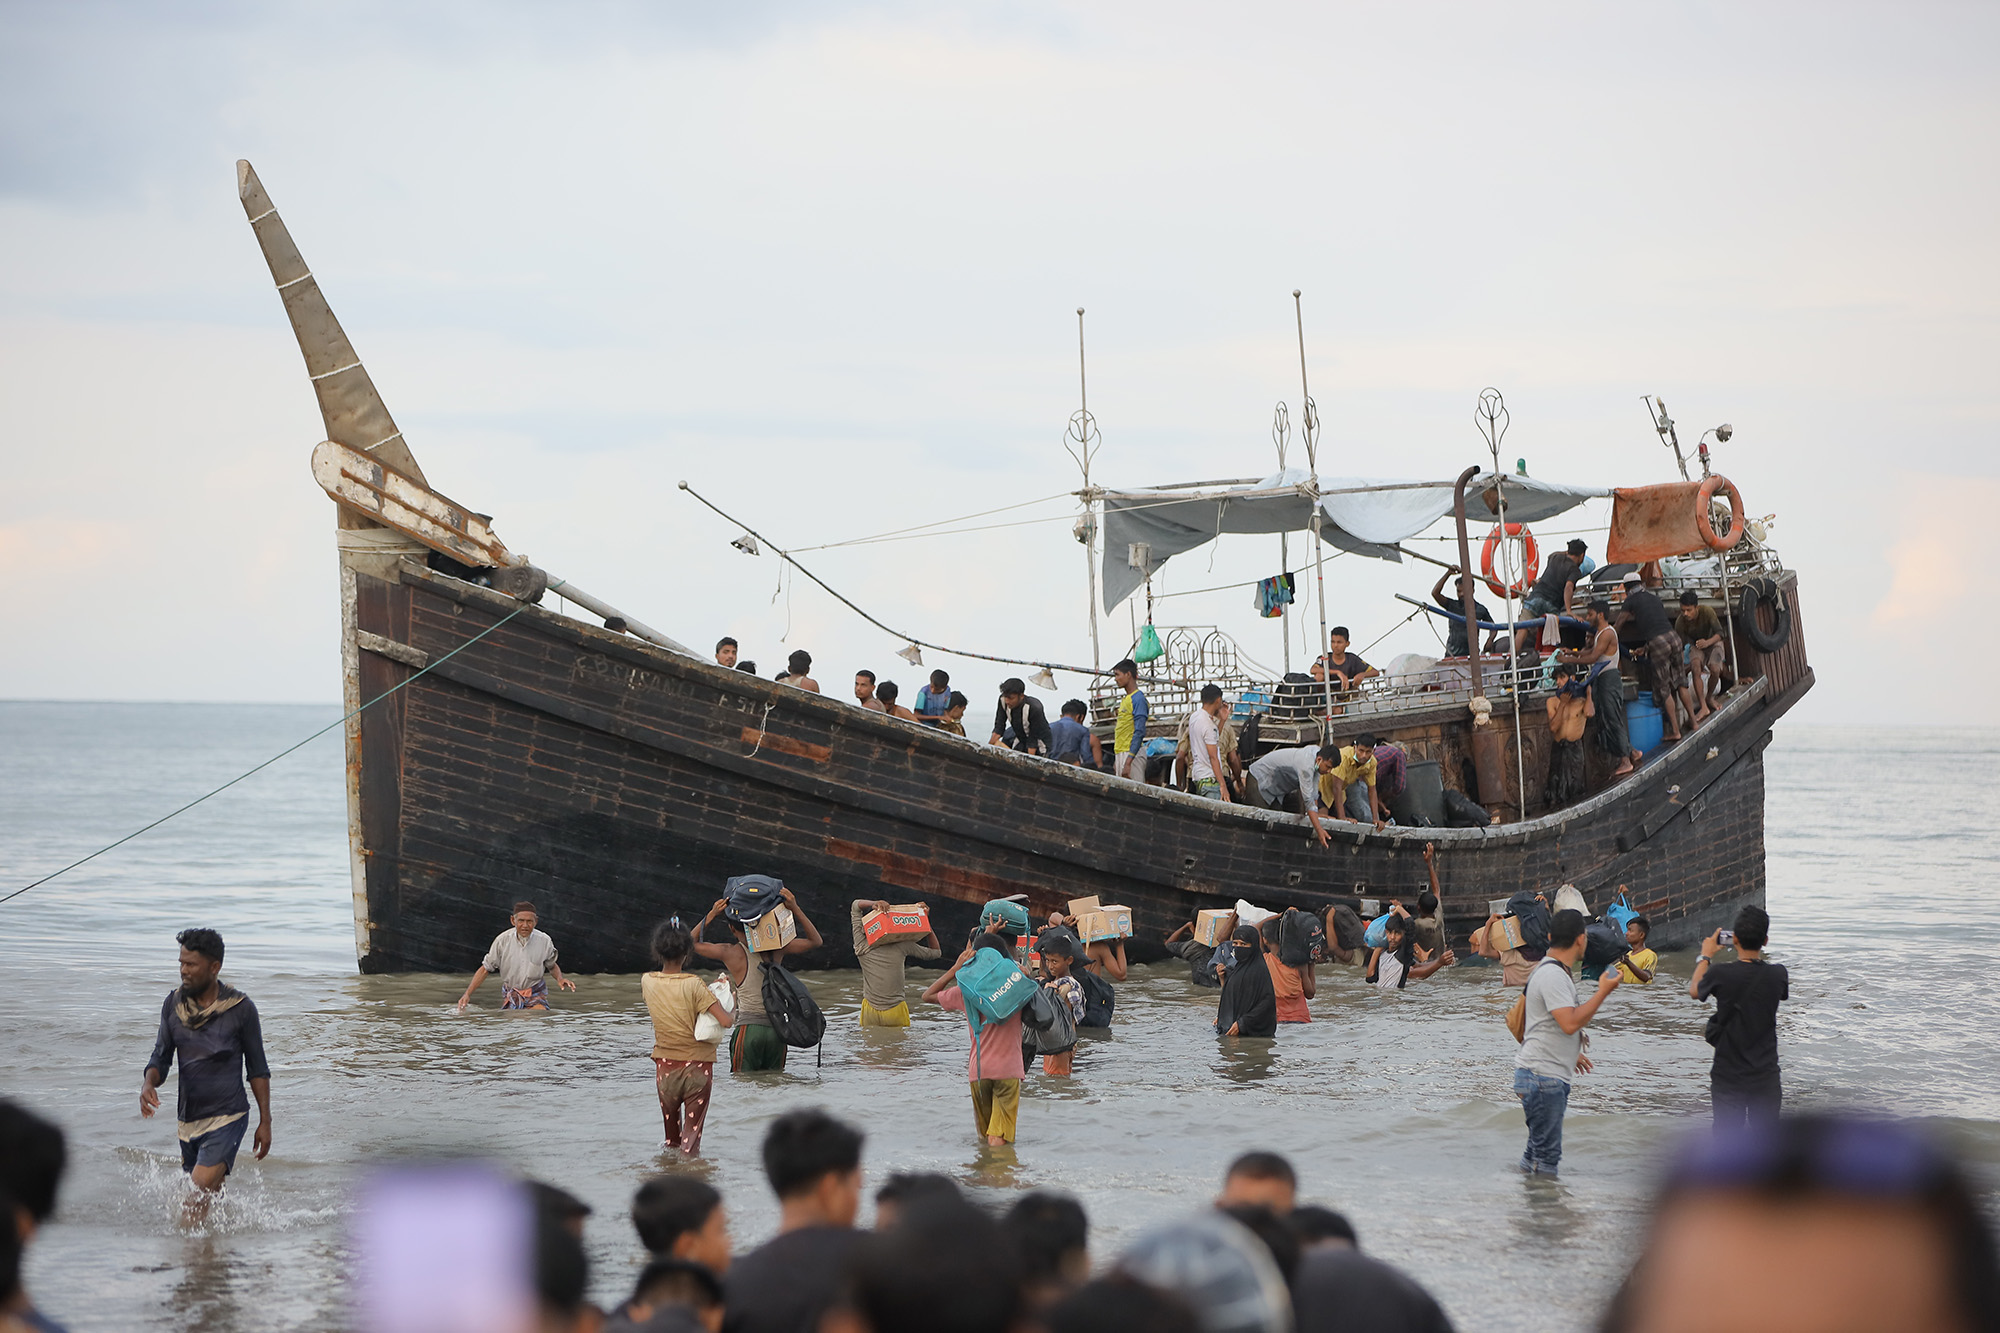 Rohingya refugees arrive in Ulee Madon in North Aceh, Indonesia after a perilous journey at sea. © UNHCR/Amanda Jufrian